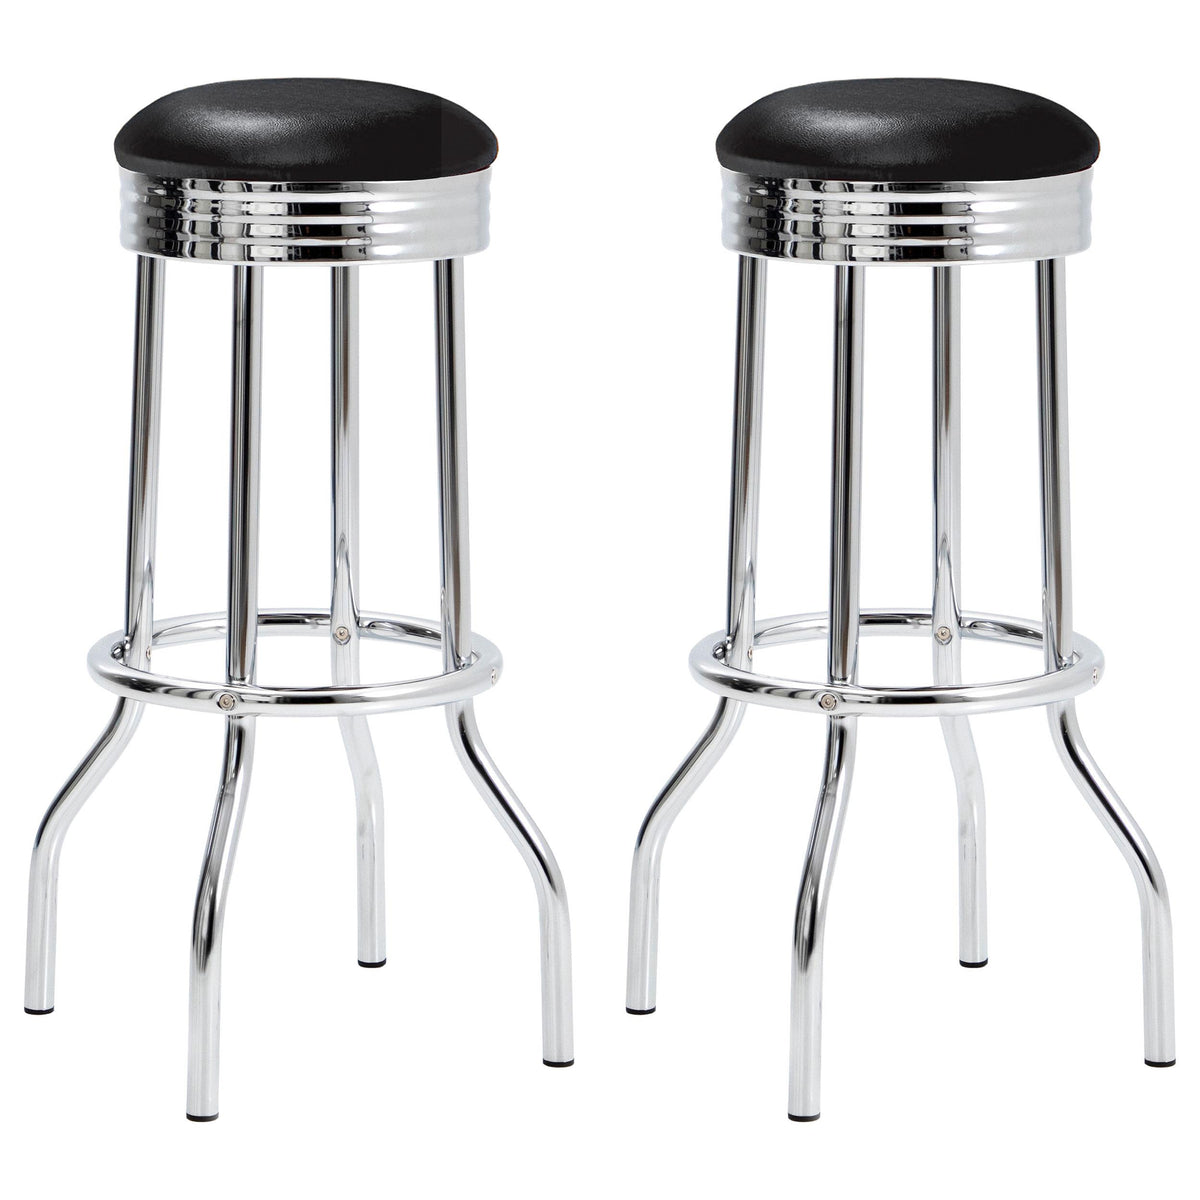 Theodore Upholstered Top Bar Stools Black and Chrome (Set of 2)  Las Vegas Furniture Stores